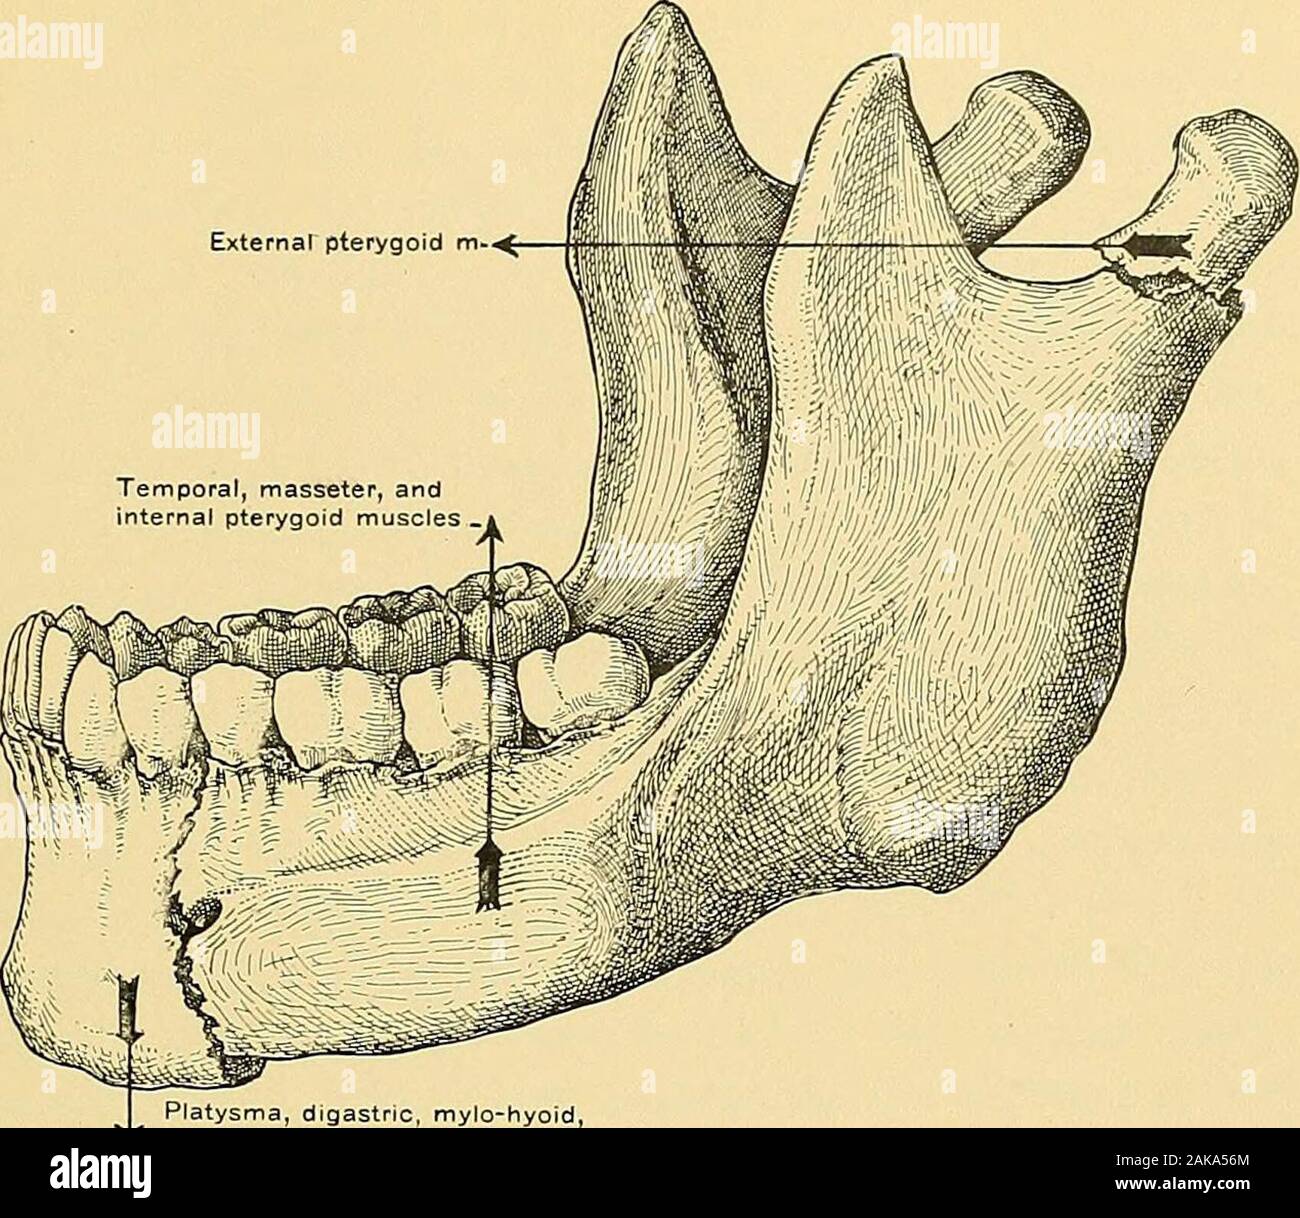 Surgical anatomy : a treatise on human anatomy in its application to the practice of medicine and surgery . xillary fissure. The malar bone can be divided with strongbone forceps, which are not allowed to extend into the spheno-maxillary fissure.If the forceps are inserted too deeply into the fissure, the internal maxillary arterymay be severed. The central incisor on the diseased side is extracted, the niuco-periosteum ofthe floor of the nose is divided close to the nasal septum, the muco-periosteum ofthe hard palate is severed in the median line, and the soft palate is thoroughlyseparated fr Stock Photo